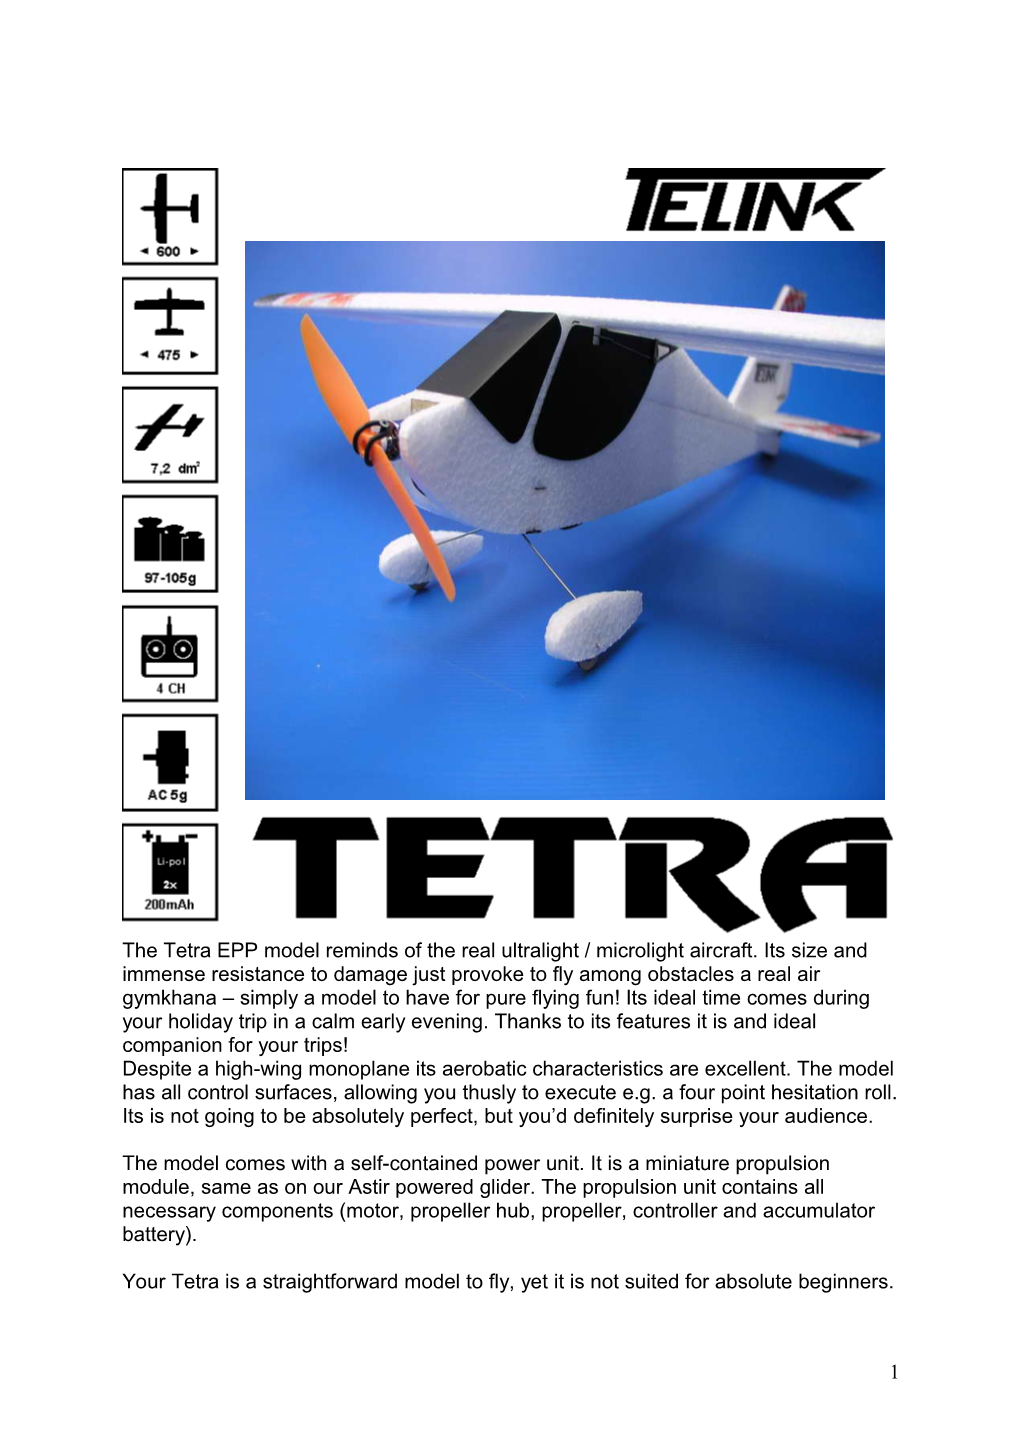 Your Tetra Is a Straightforward Model to Fly, Yet It Is Not Suited for Absolute Beginners